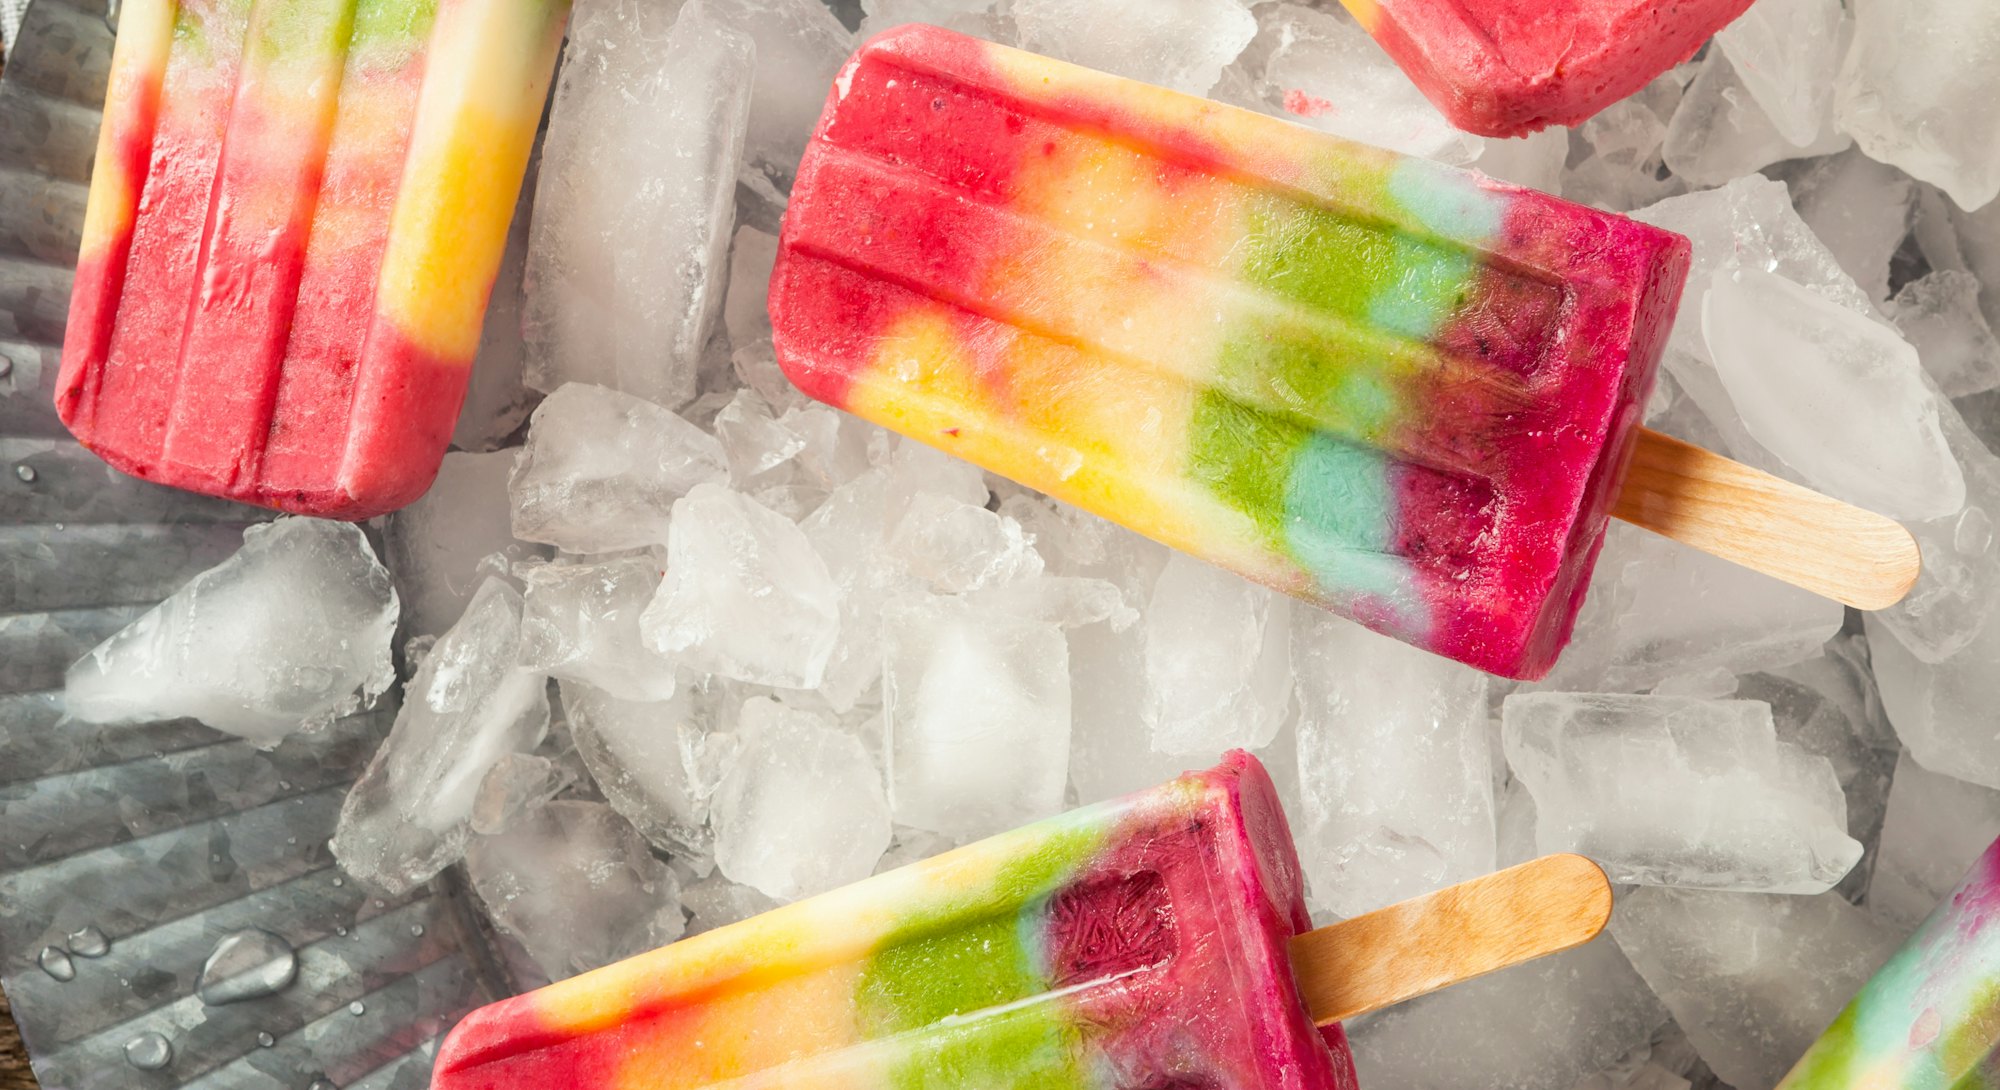 Homemade rainbow popsicles scattered on a tray of ice for summer popsicle inspiration.